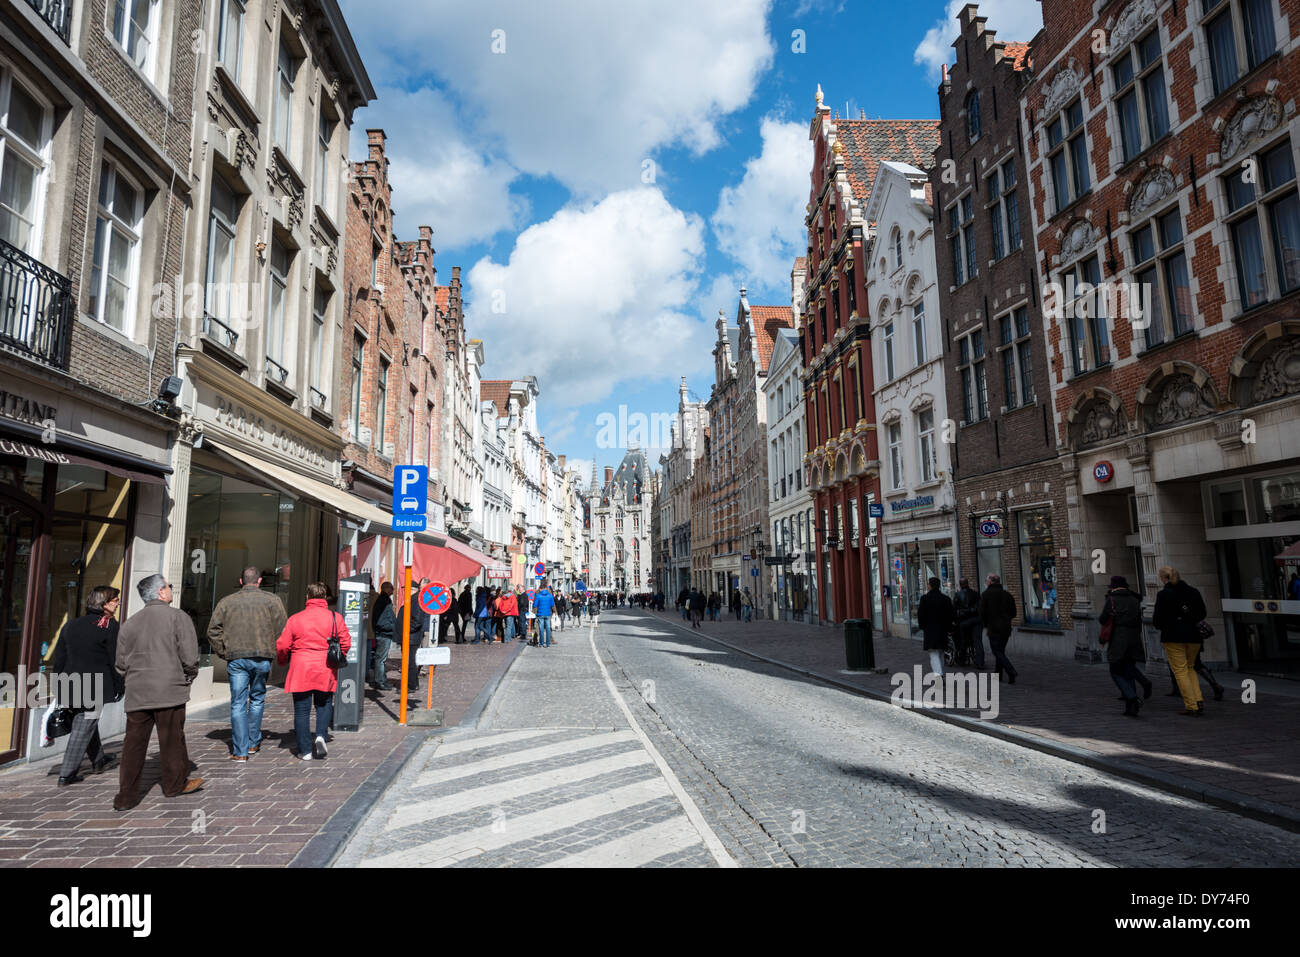 BRUGES, Belgium - A cobblestone street in the historic center of Bruges. Stock Photo